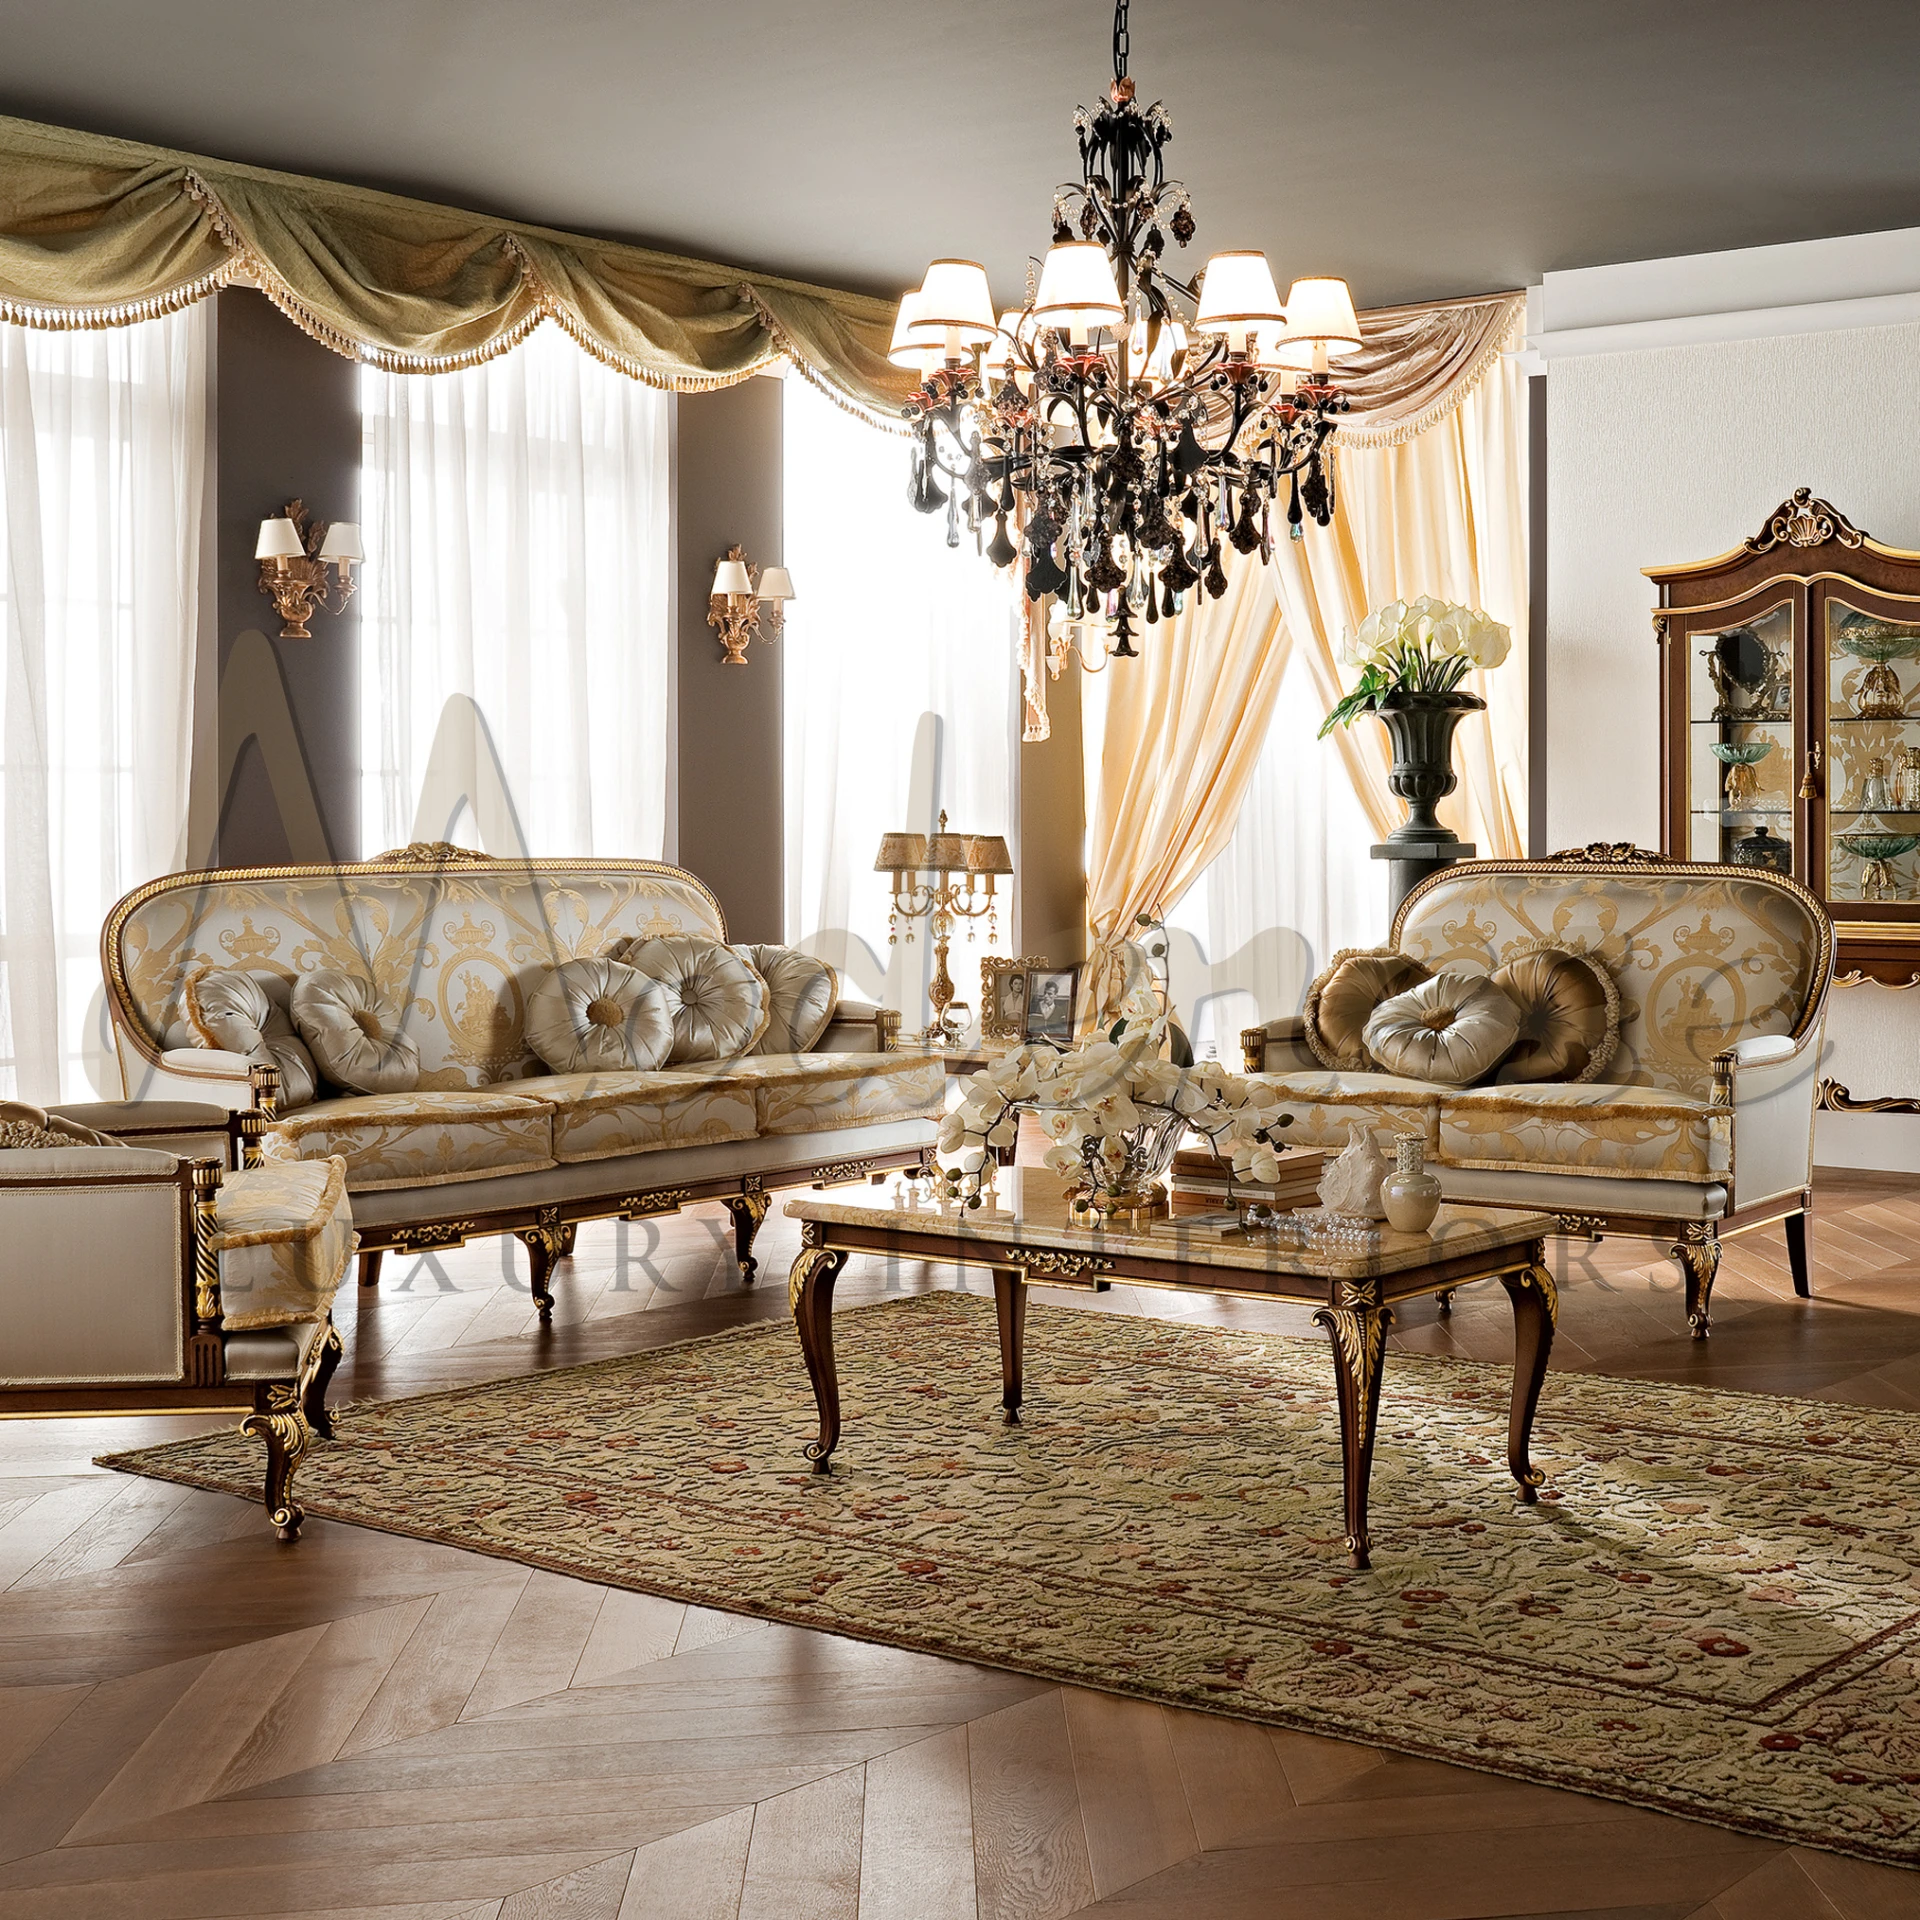 Elegant Italian Classy Coffee Table, showcasing sumptuous marble and exquisite woodworking for luxury interiors.
